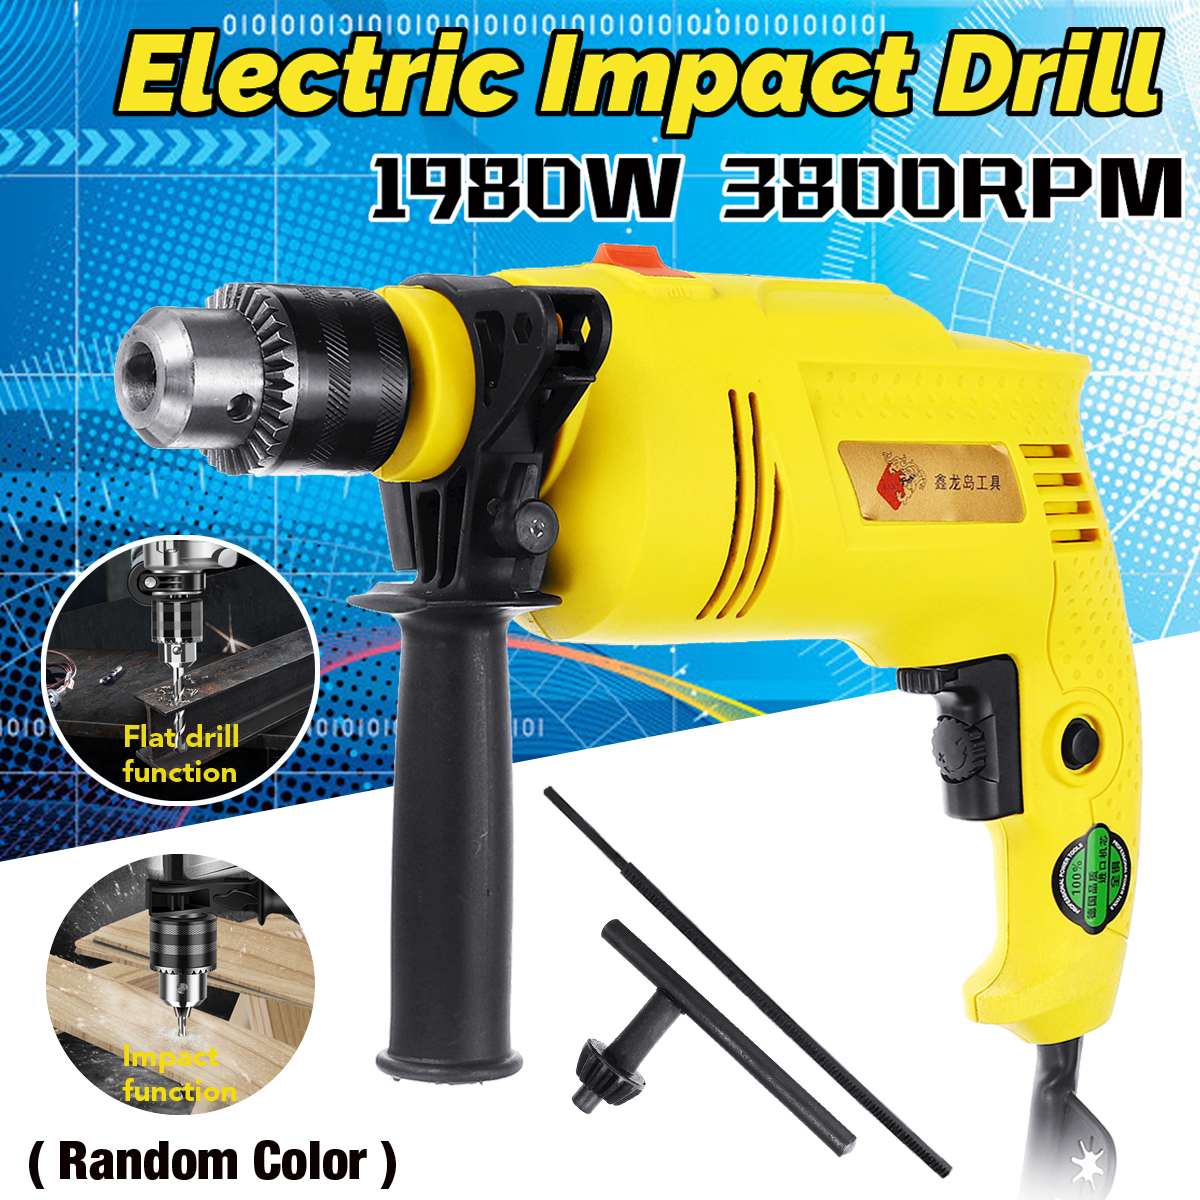 1980W-3800rpm-Electric-Impact-Drill-0-3800rmin-Electric-Drill-Five-Axes-Linkage-Power-Drills-Powerfu-1468497-2